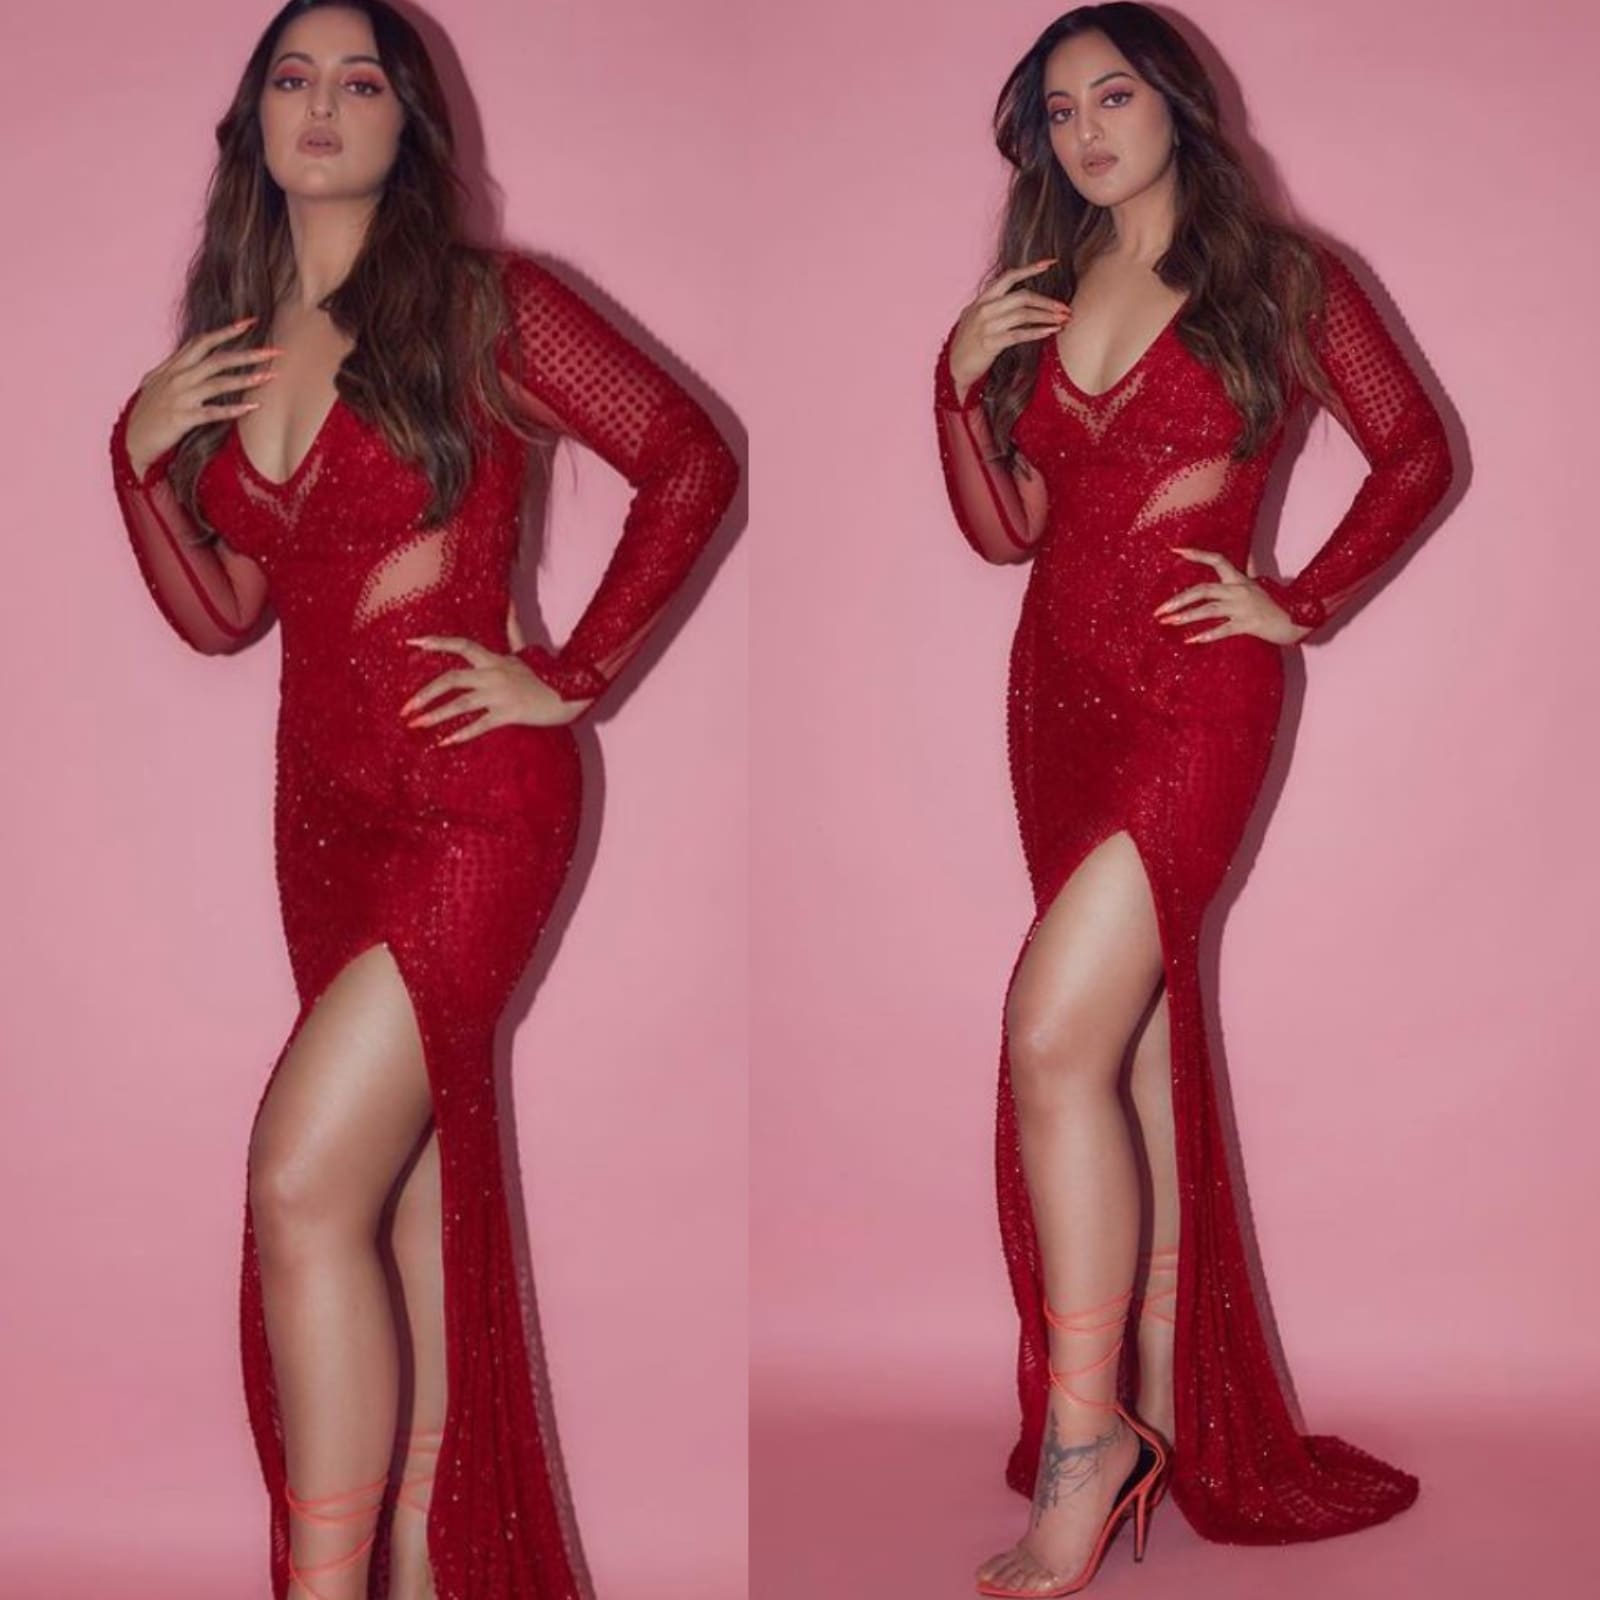 Sonakshi Sinha Raises The Glam Quotient In A Red Thigh-High Slit Dress -  News18